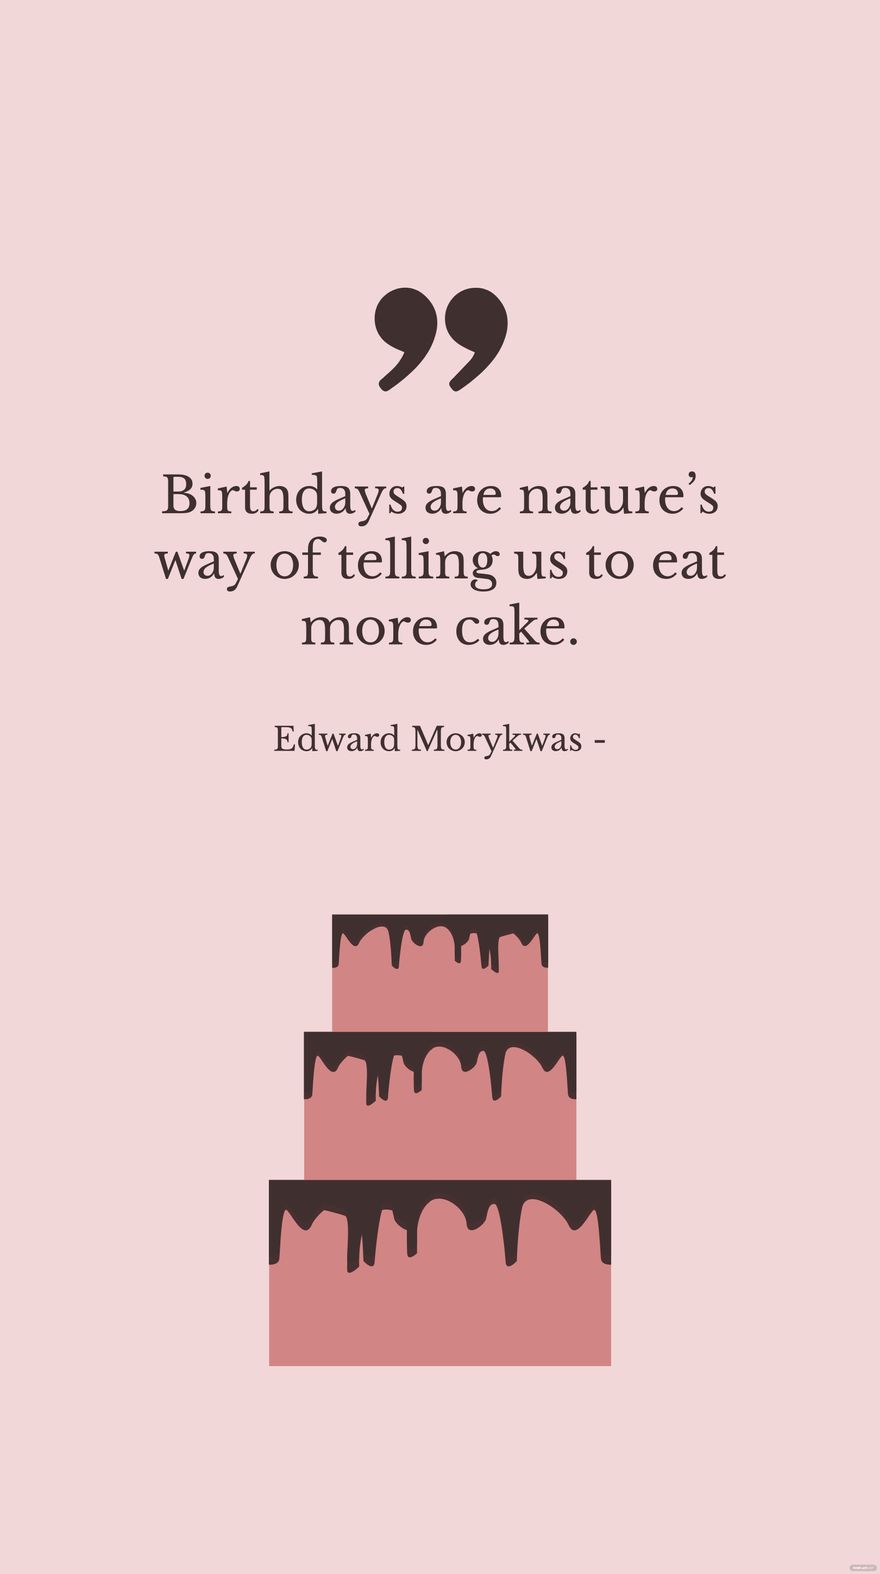 Edward Morykwas - Birthdays are nature’s way of telling us to eat more cake. in JPG